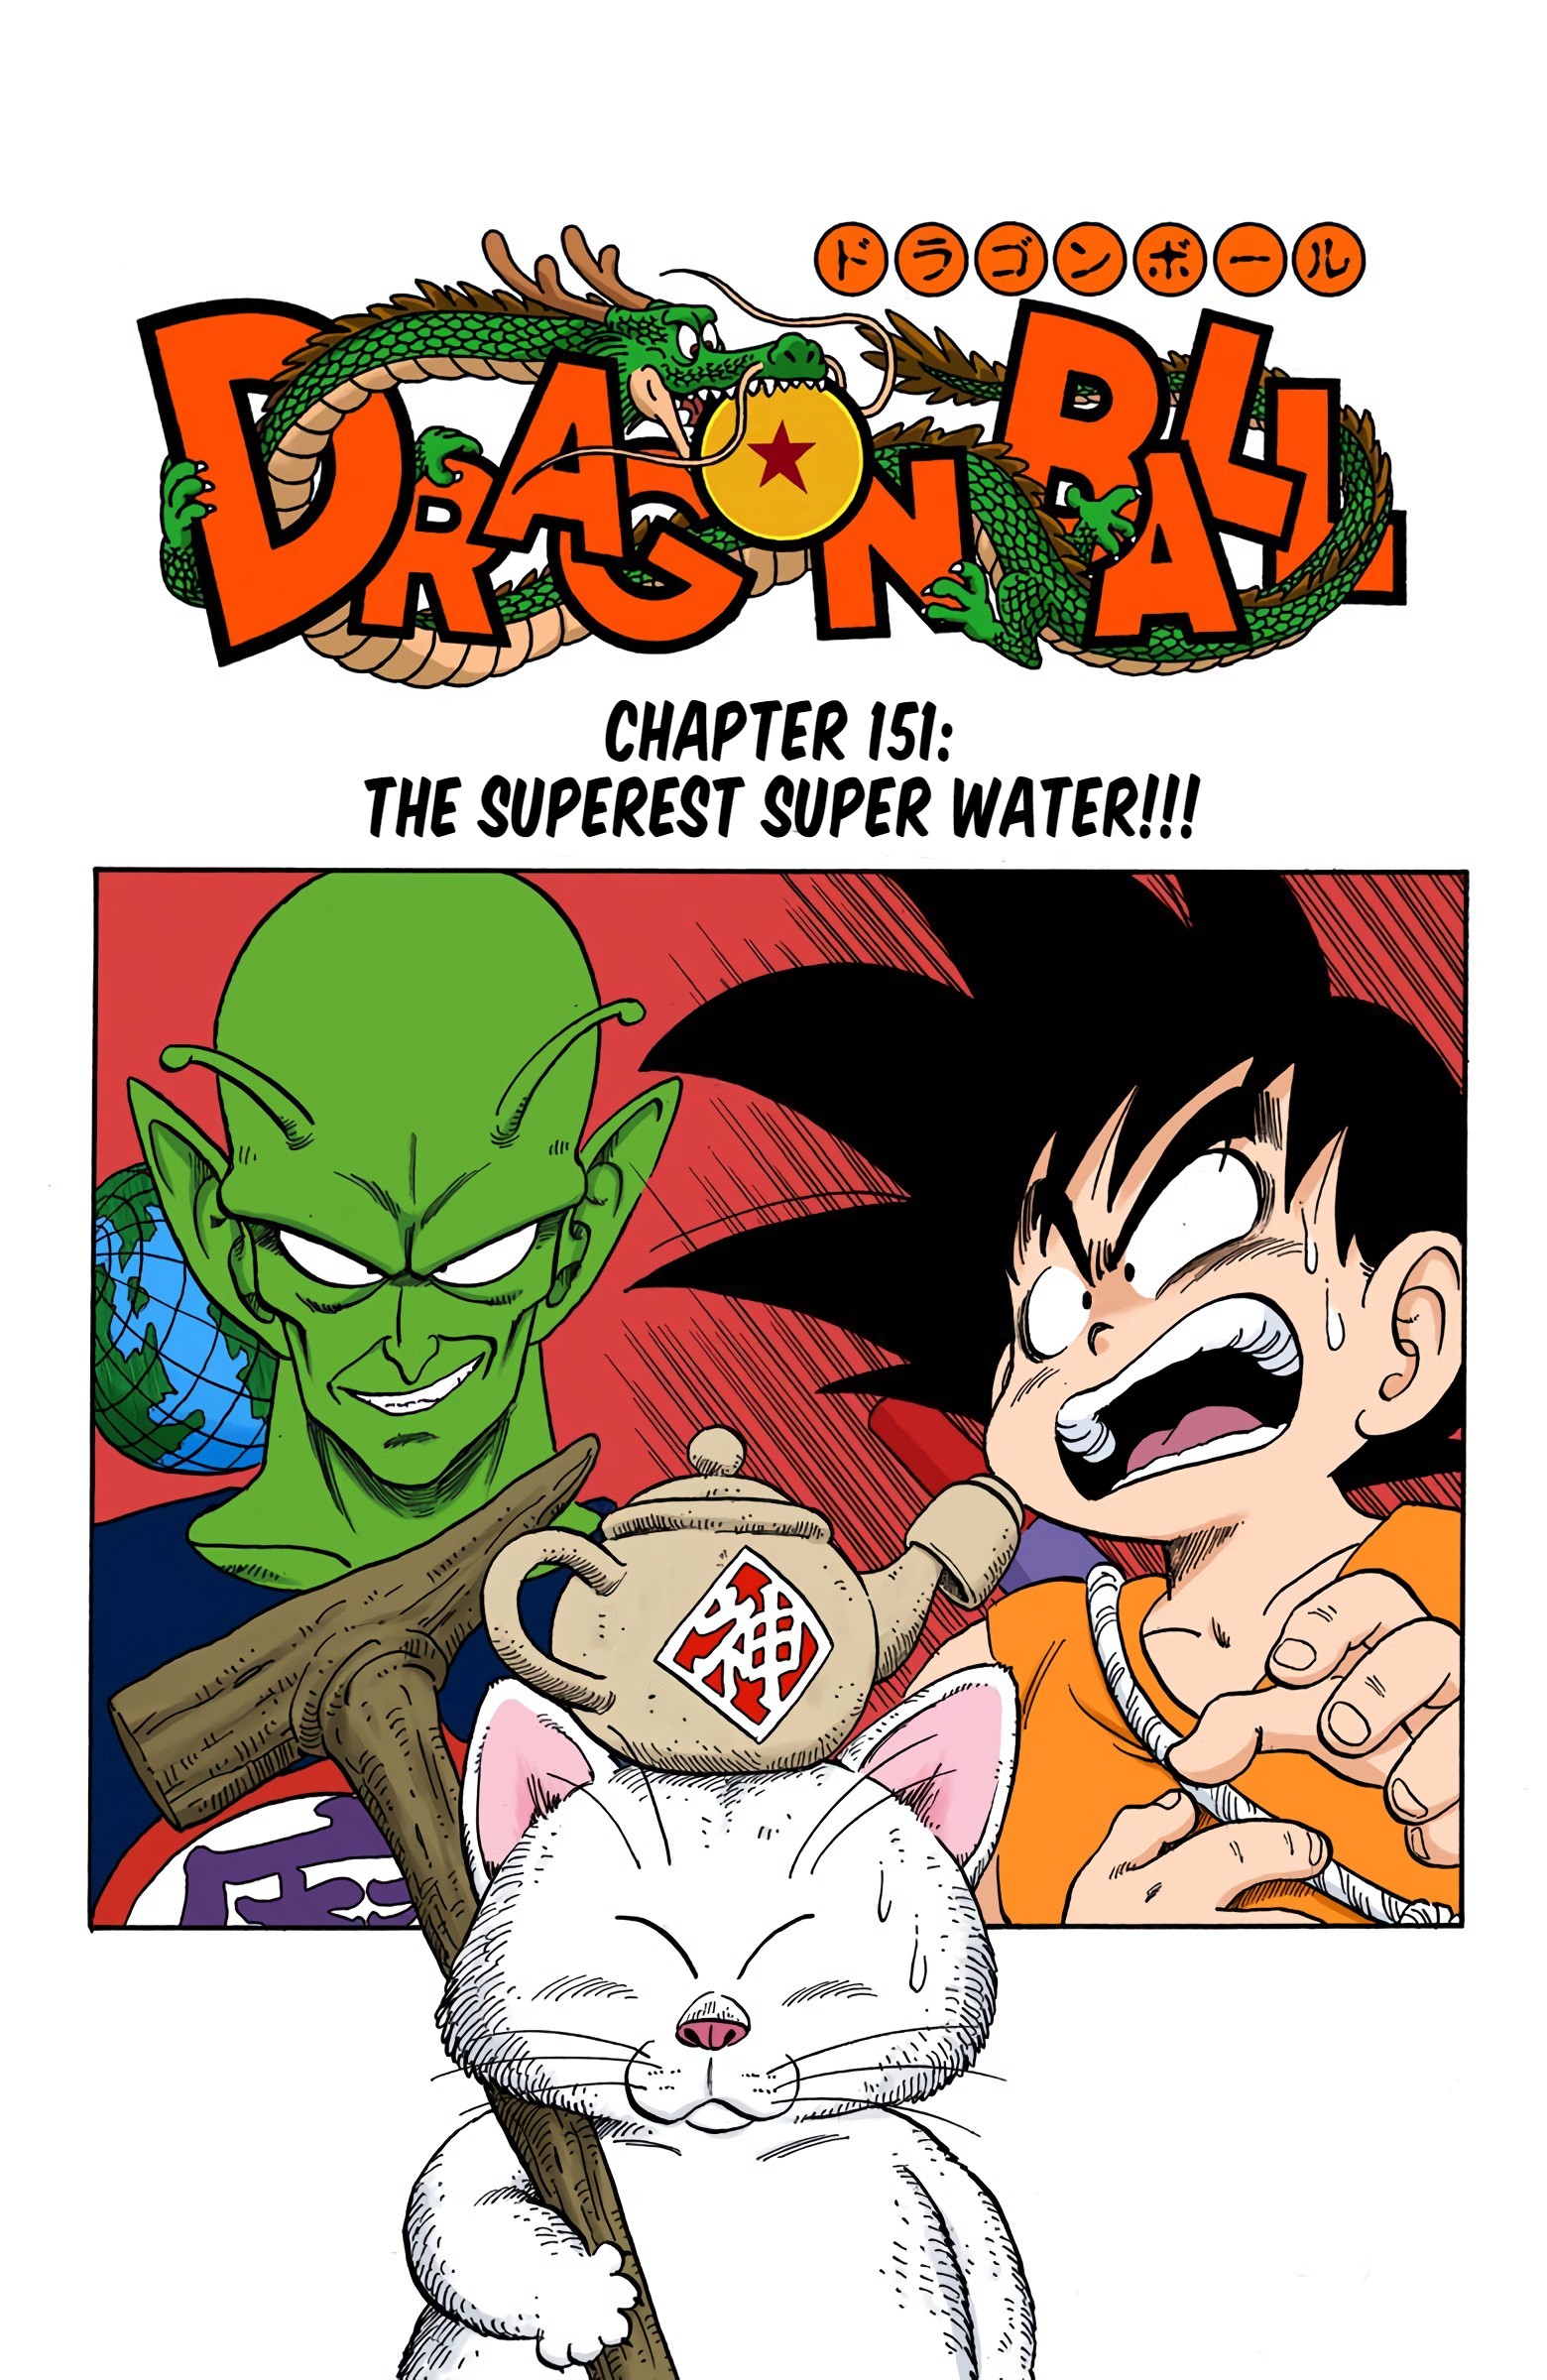 Dragon Ball - Full Color Edition Vol.13 Chapter 151